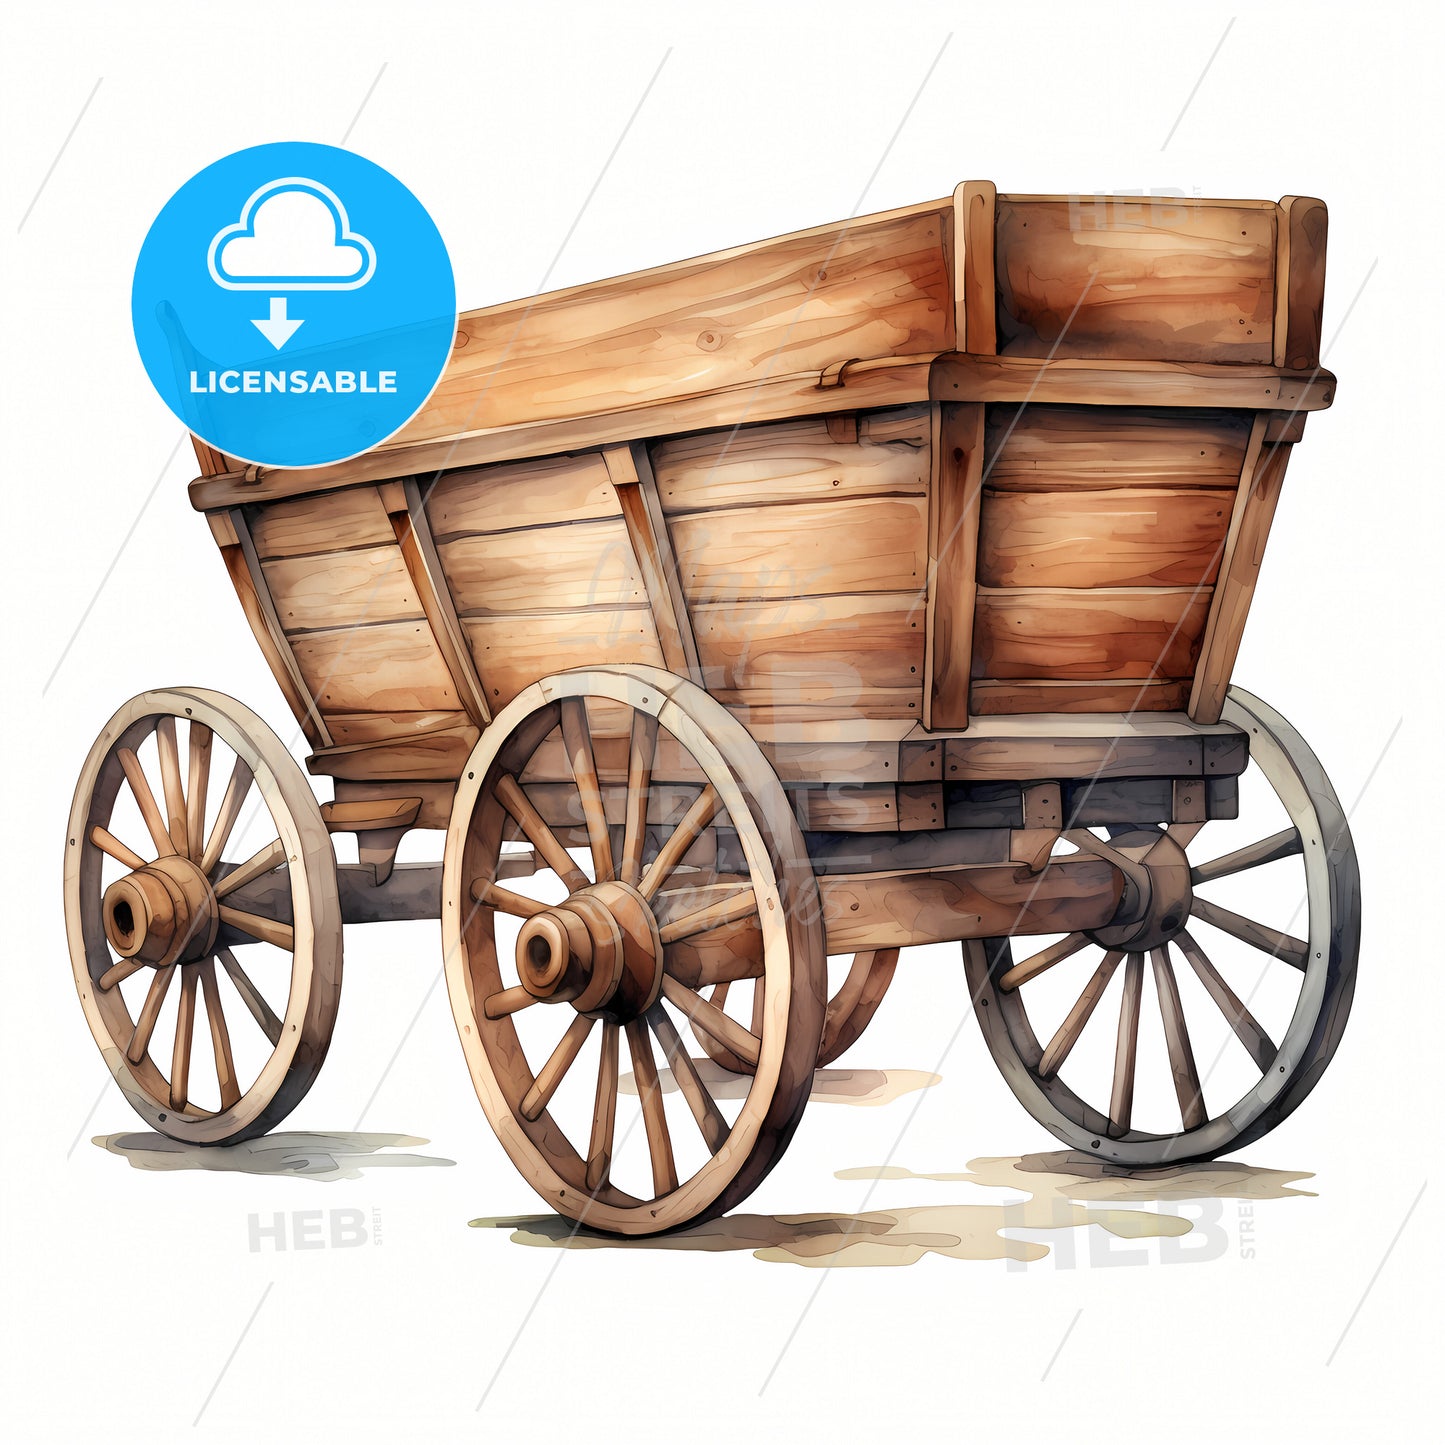 A Wooden Wagon With Wheels